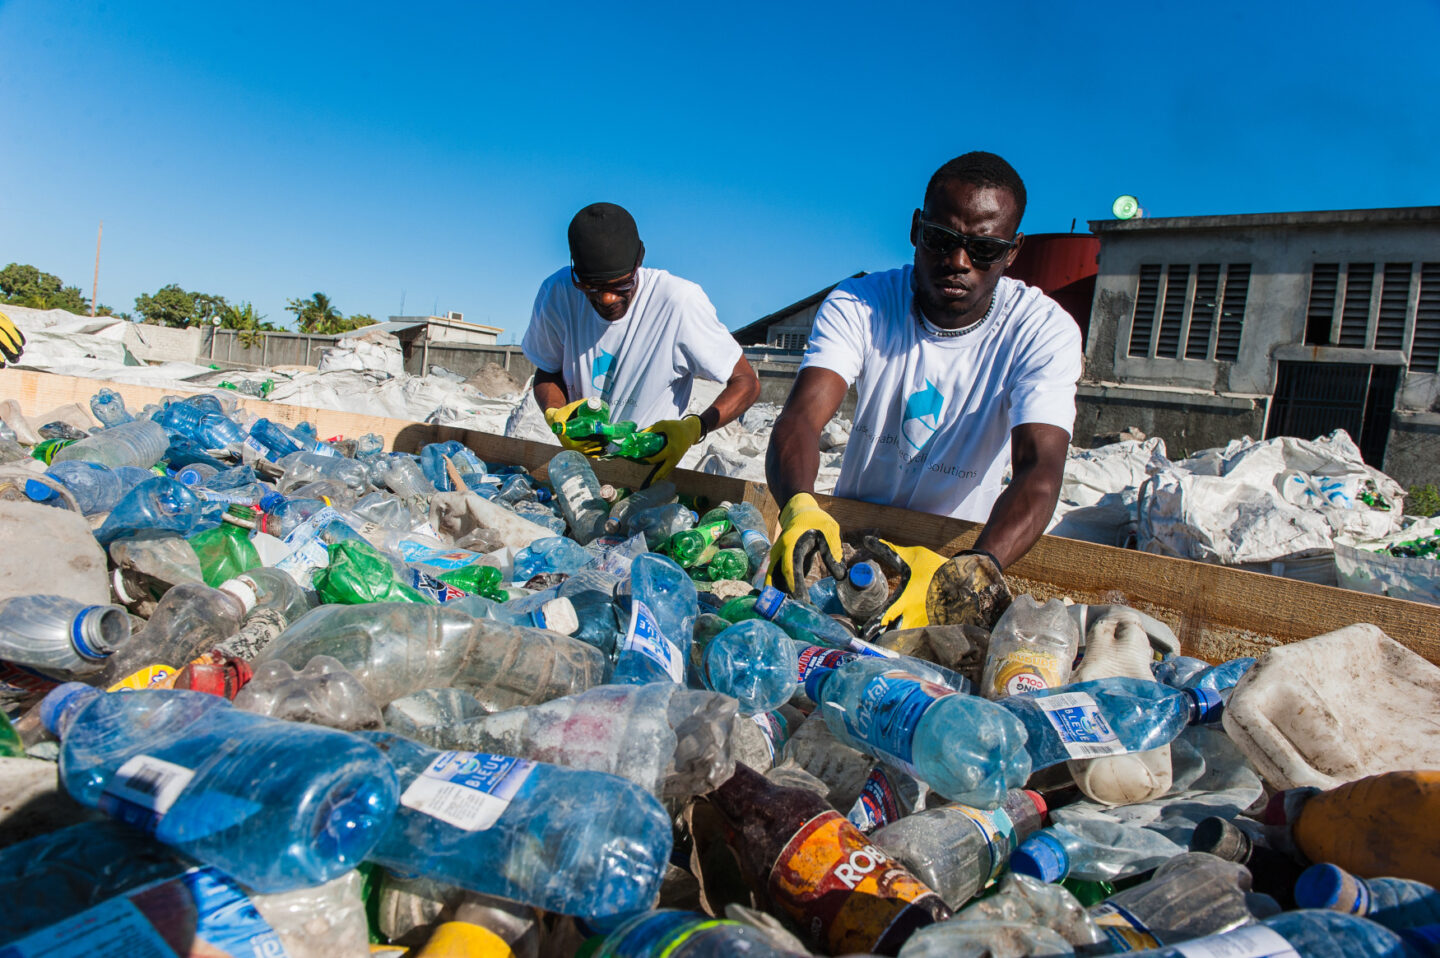 Individuals pick up plastic bottles at a recycling center